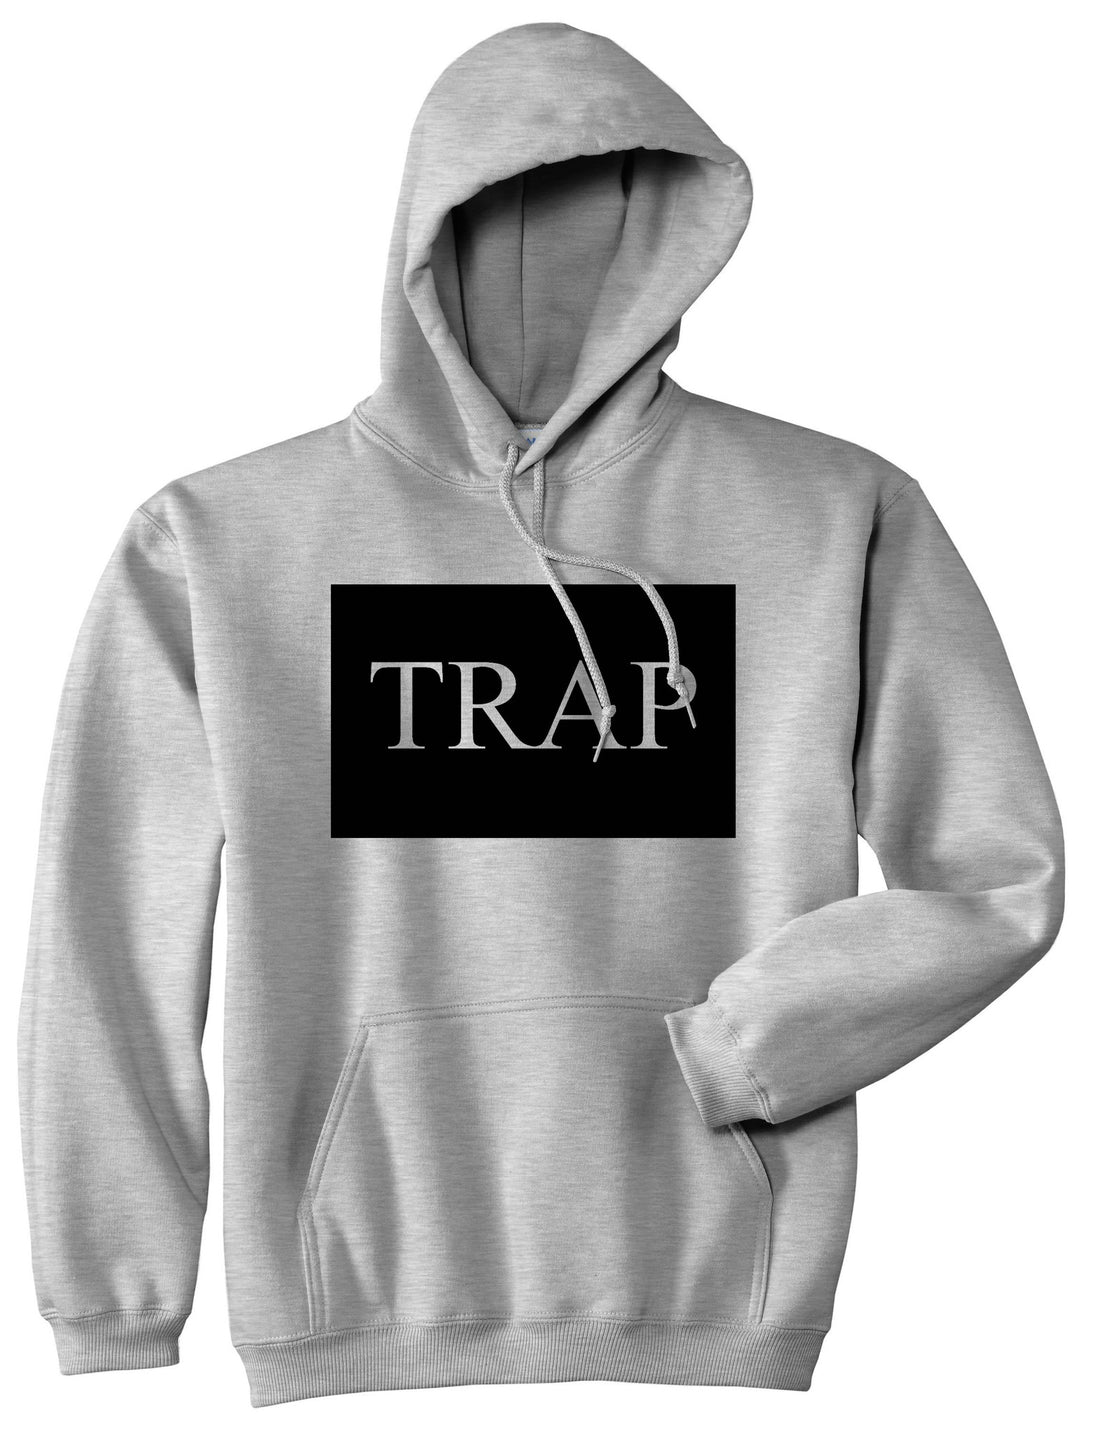 Trap Rectangle Logo Pullover Hoodie in Grey By Kings Of NY